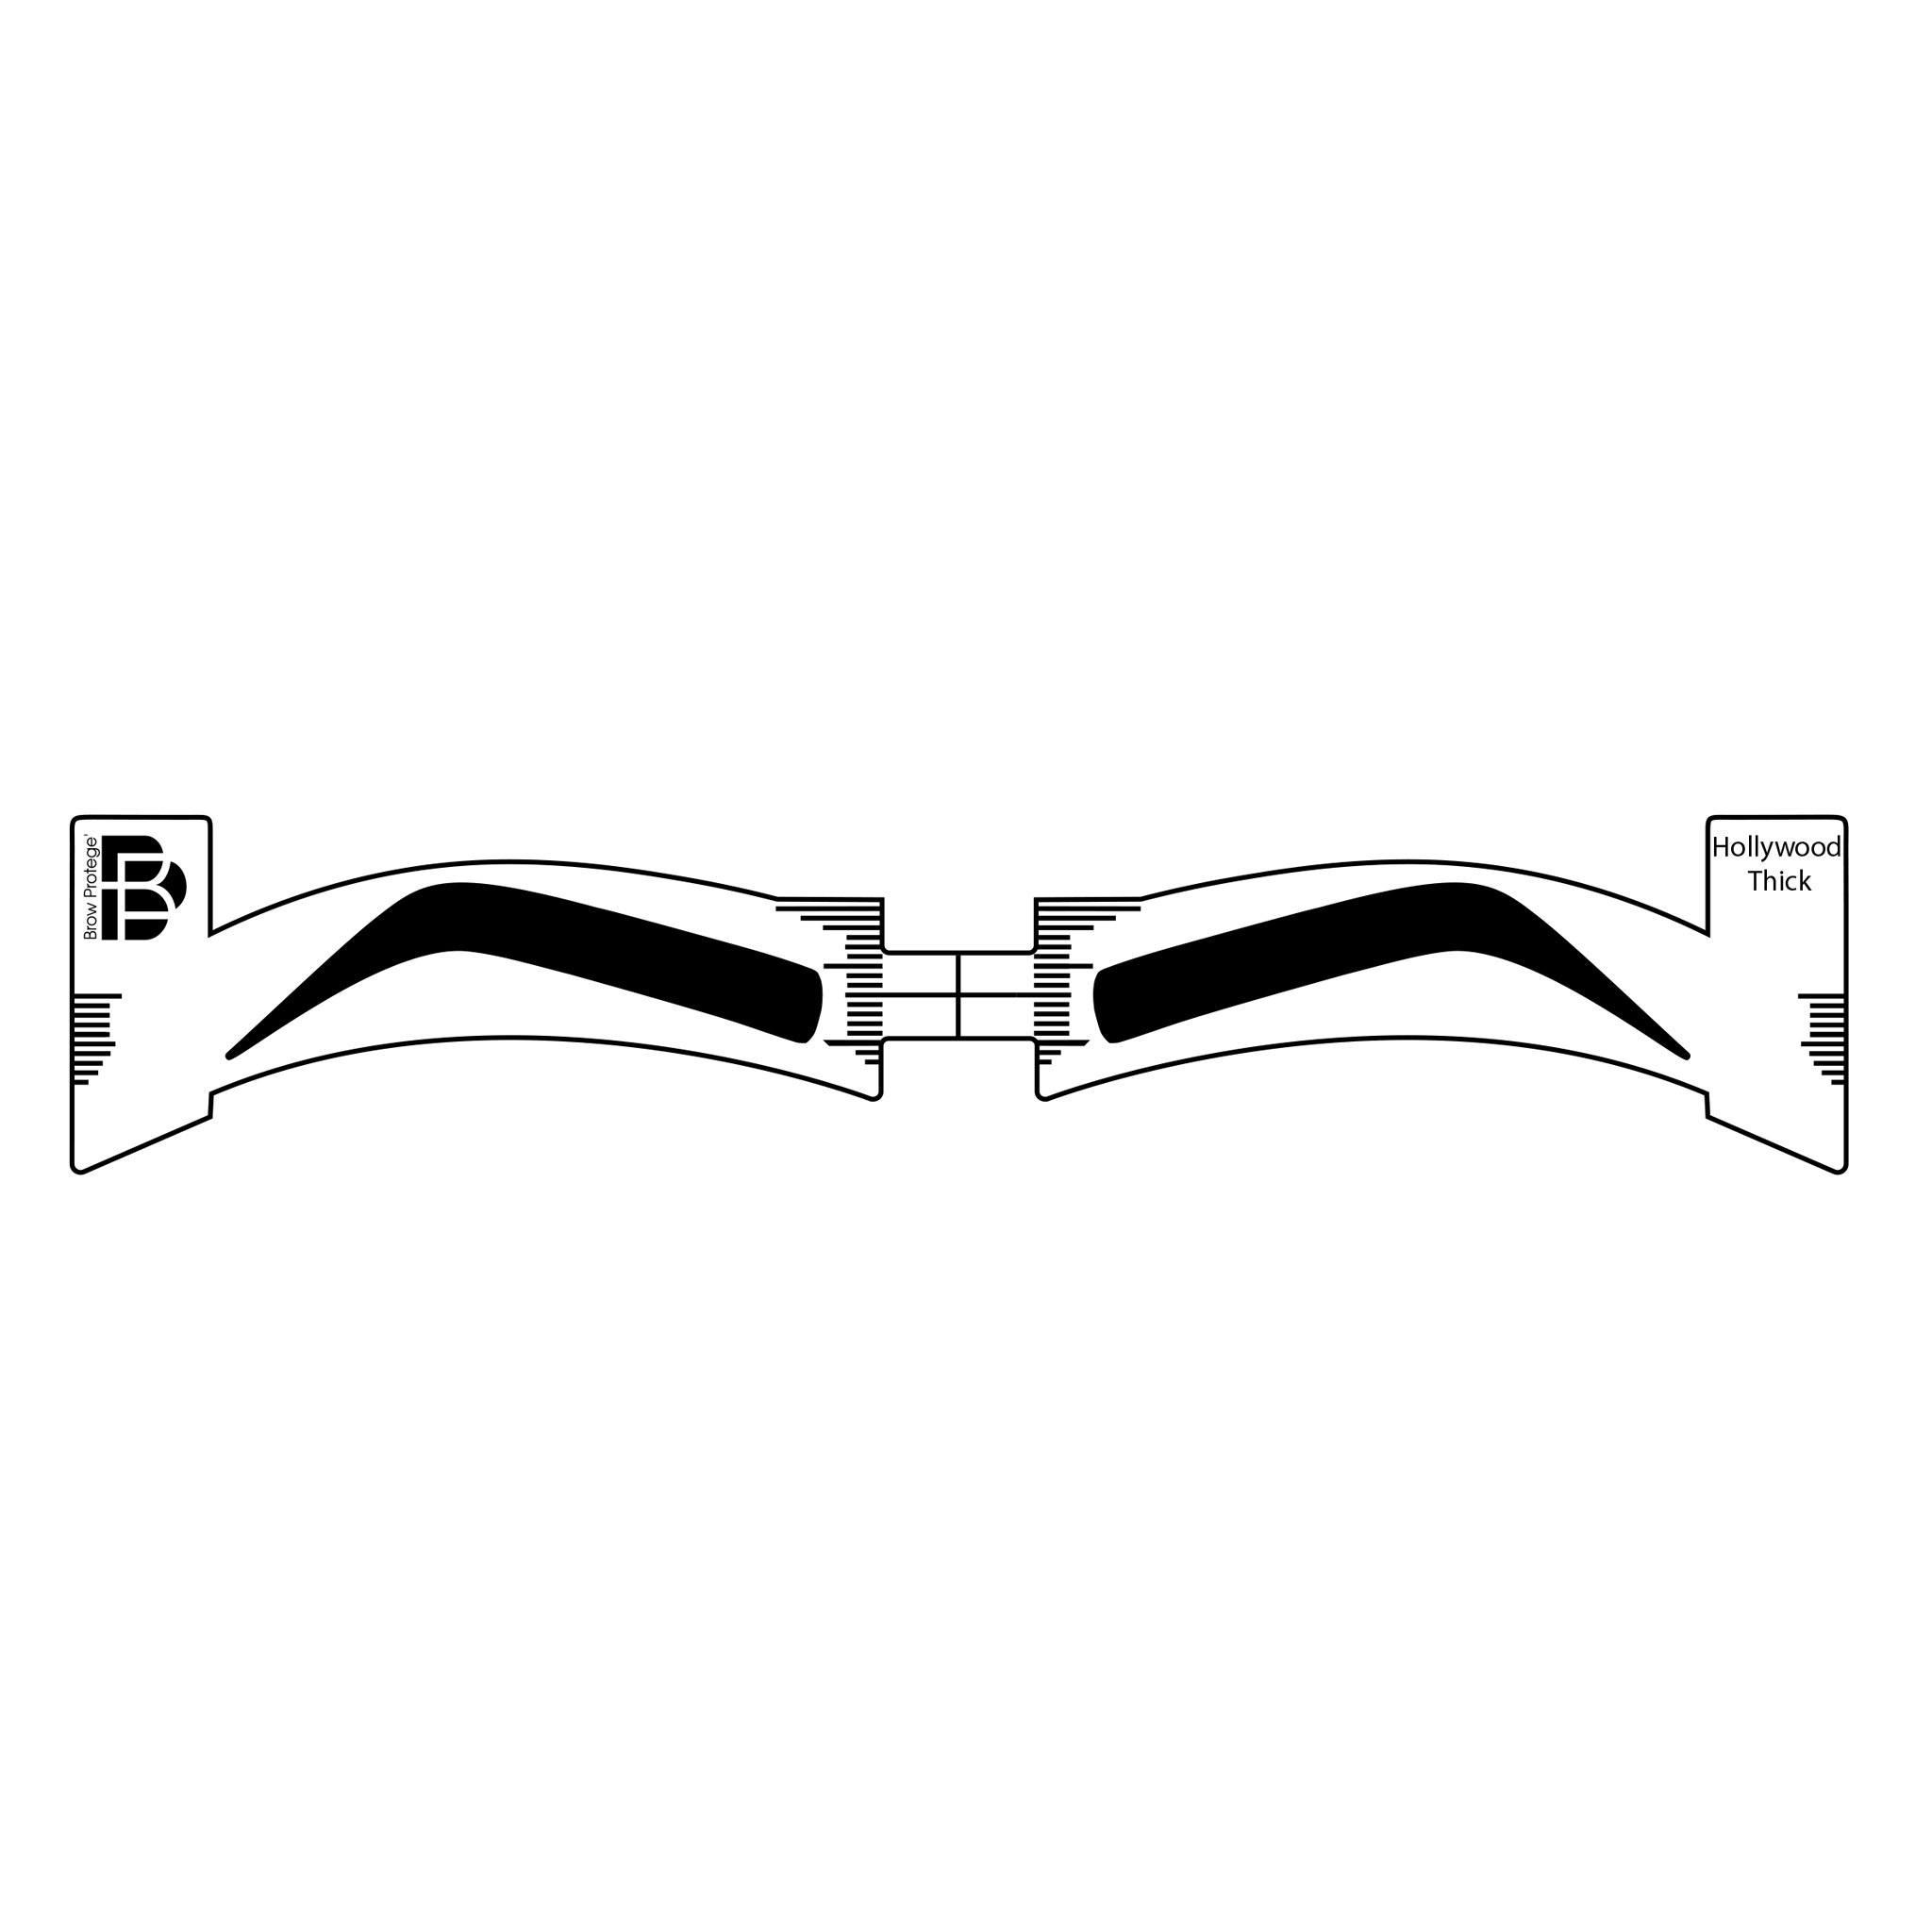 Brow PROtege' Eyebrow Stencils For The Professional [product_price] Real Eyez Beauty